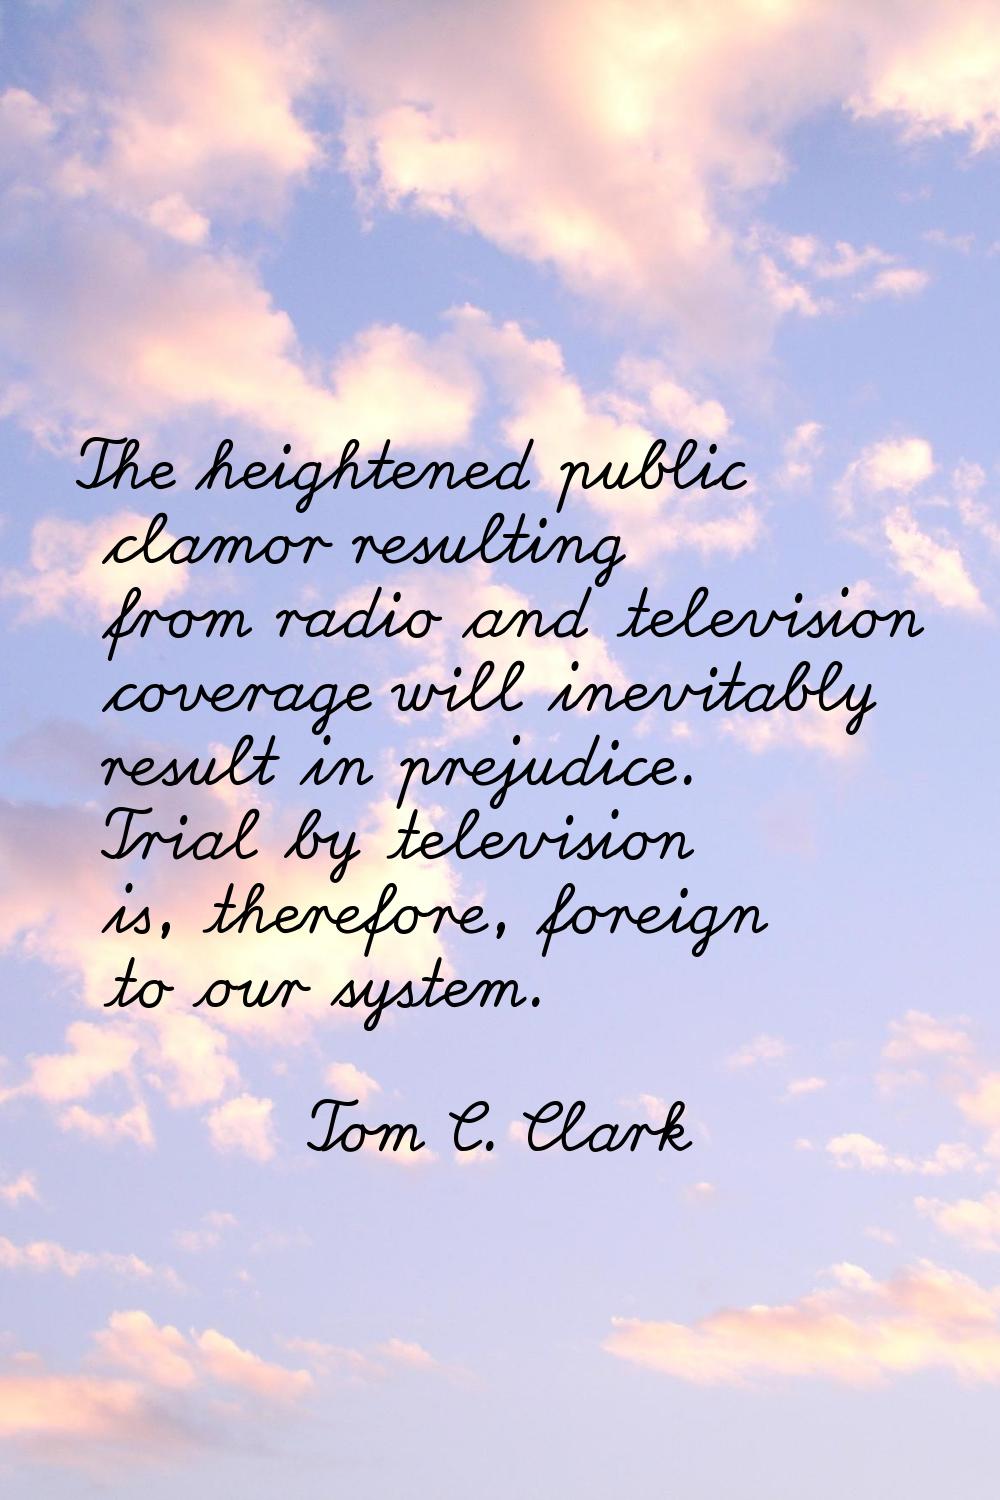 The heightened public clamor resulting from radio and television coverage will inevitably result in